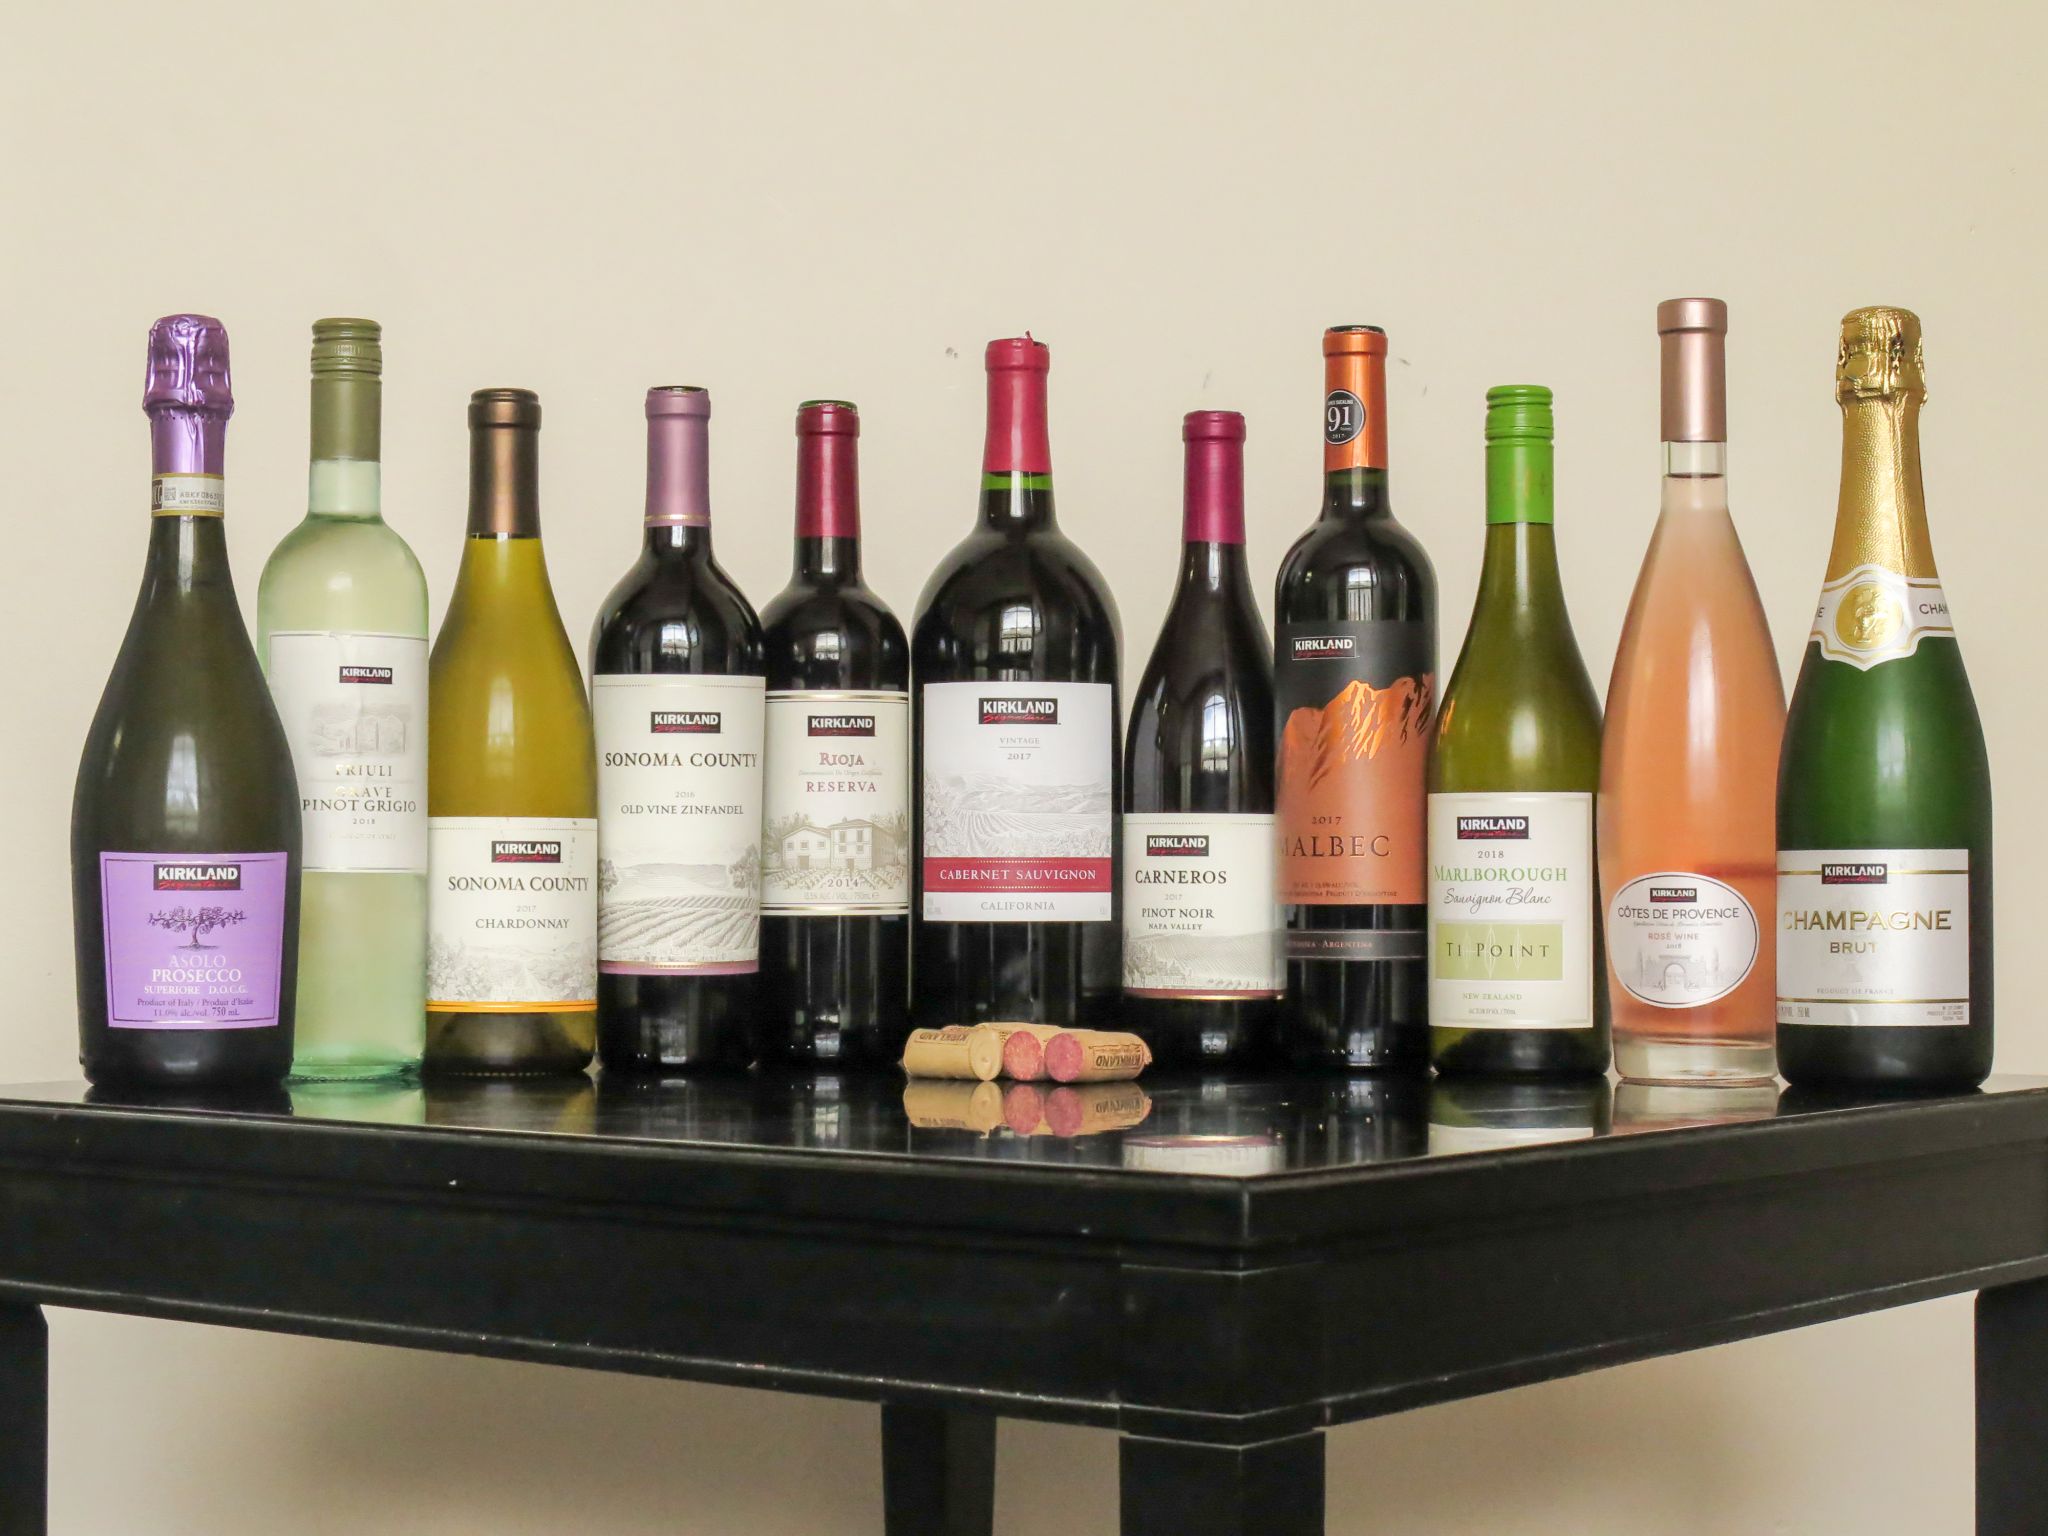 Casual drinkers tried 11 Costco wines Here are the best (and worst) of